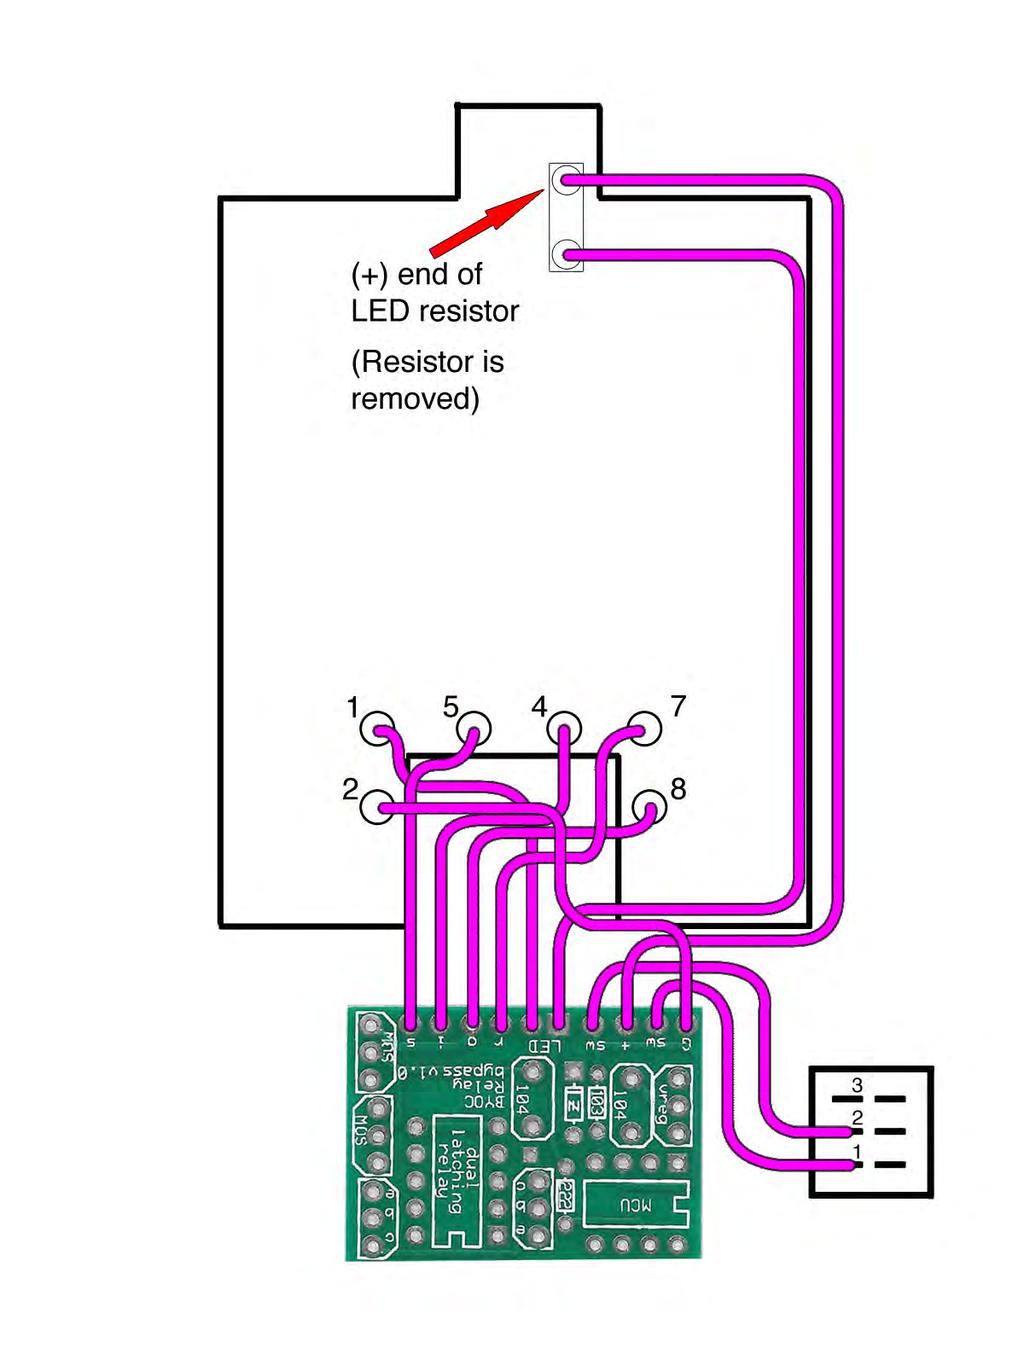 BYOC Wiring 1 You will need to use a DPDT momentary switch if you want to use the Relay Bypass Switch with a BYOC